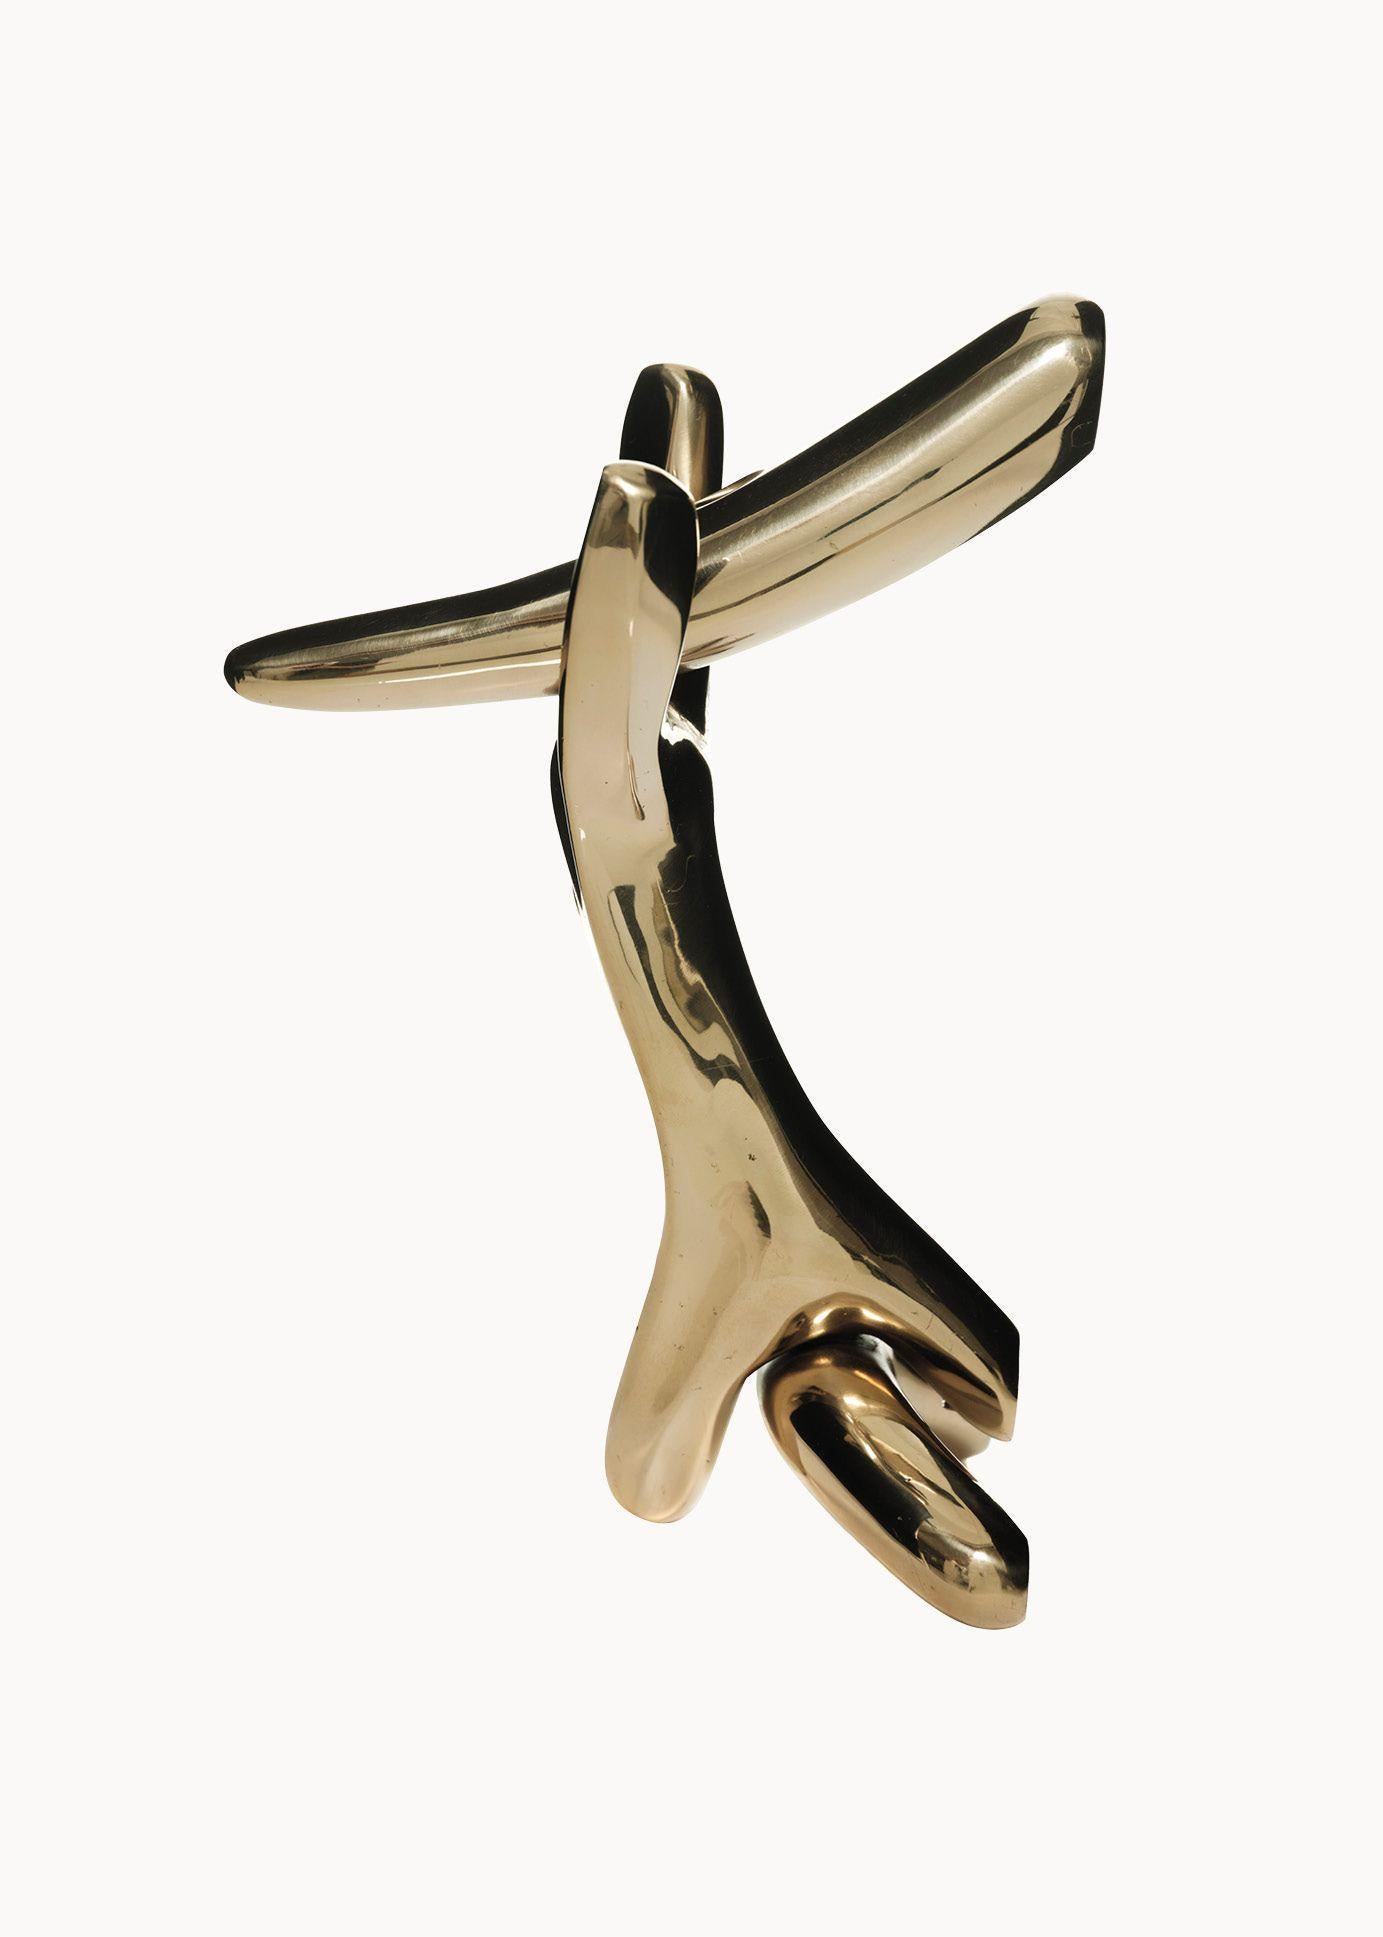 Knob Rinocerontico designed by Salvador Dali produced by BD design.

Three polished lacquered cast bronze pieces joined together.

Measures: 13 x 19 x 24 H cm 

During the 1930s in Paris, Salvador Dalí surrounded himself with a circle of friends